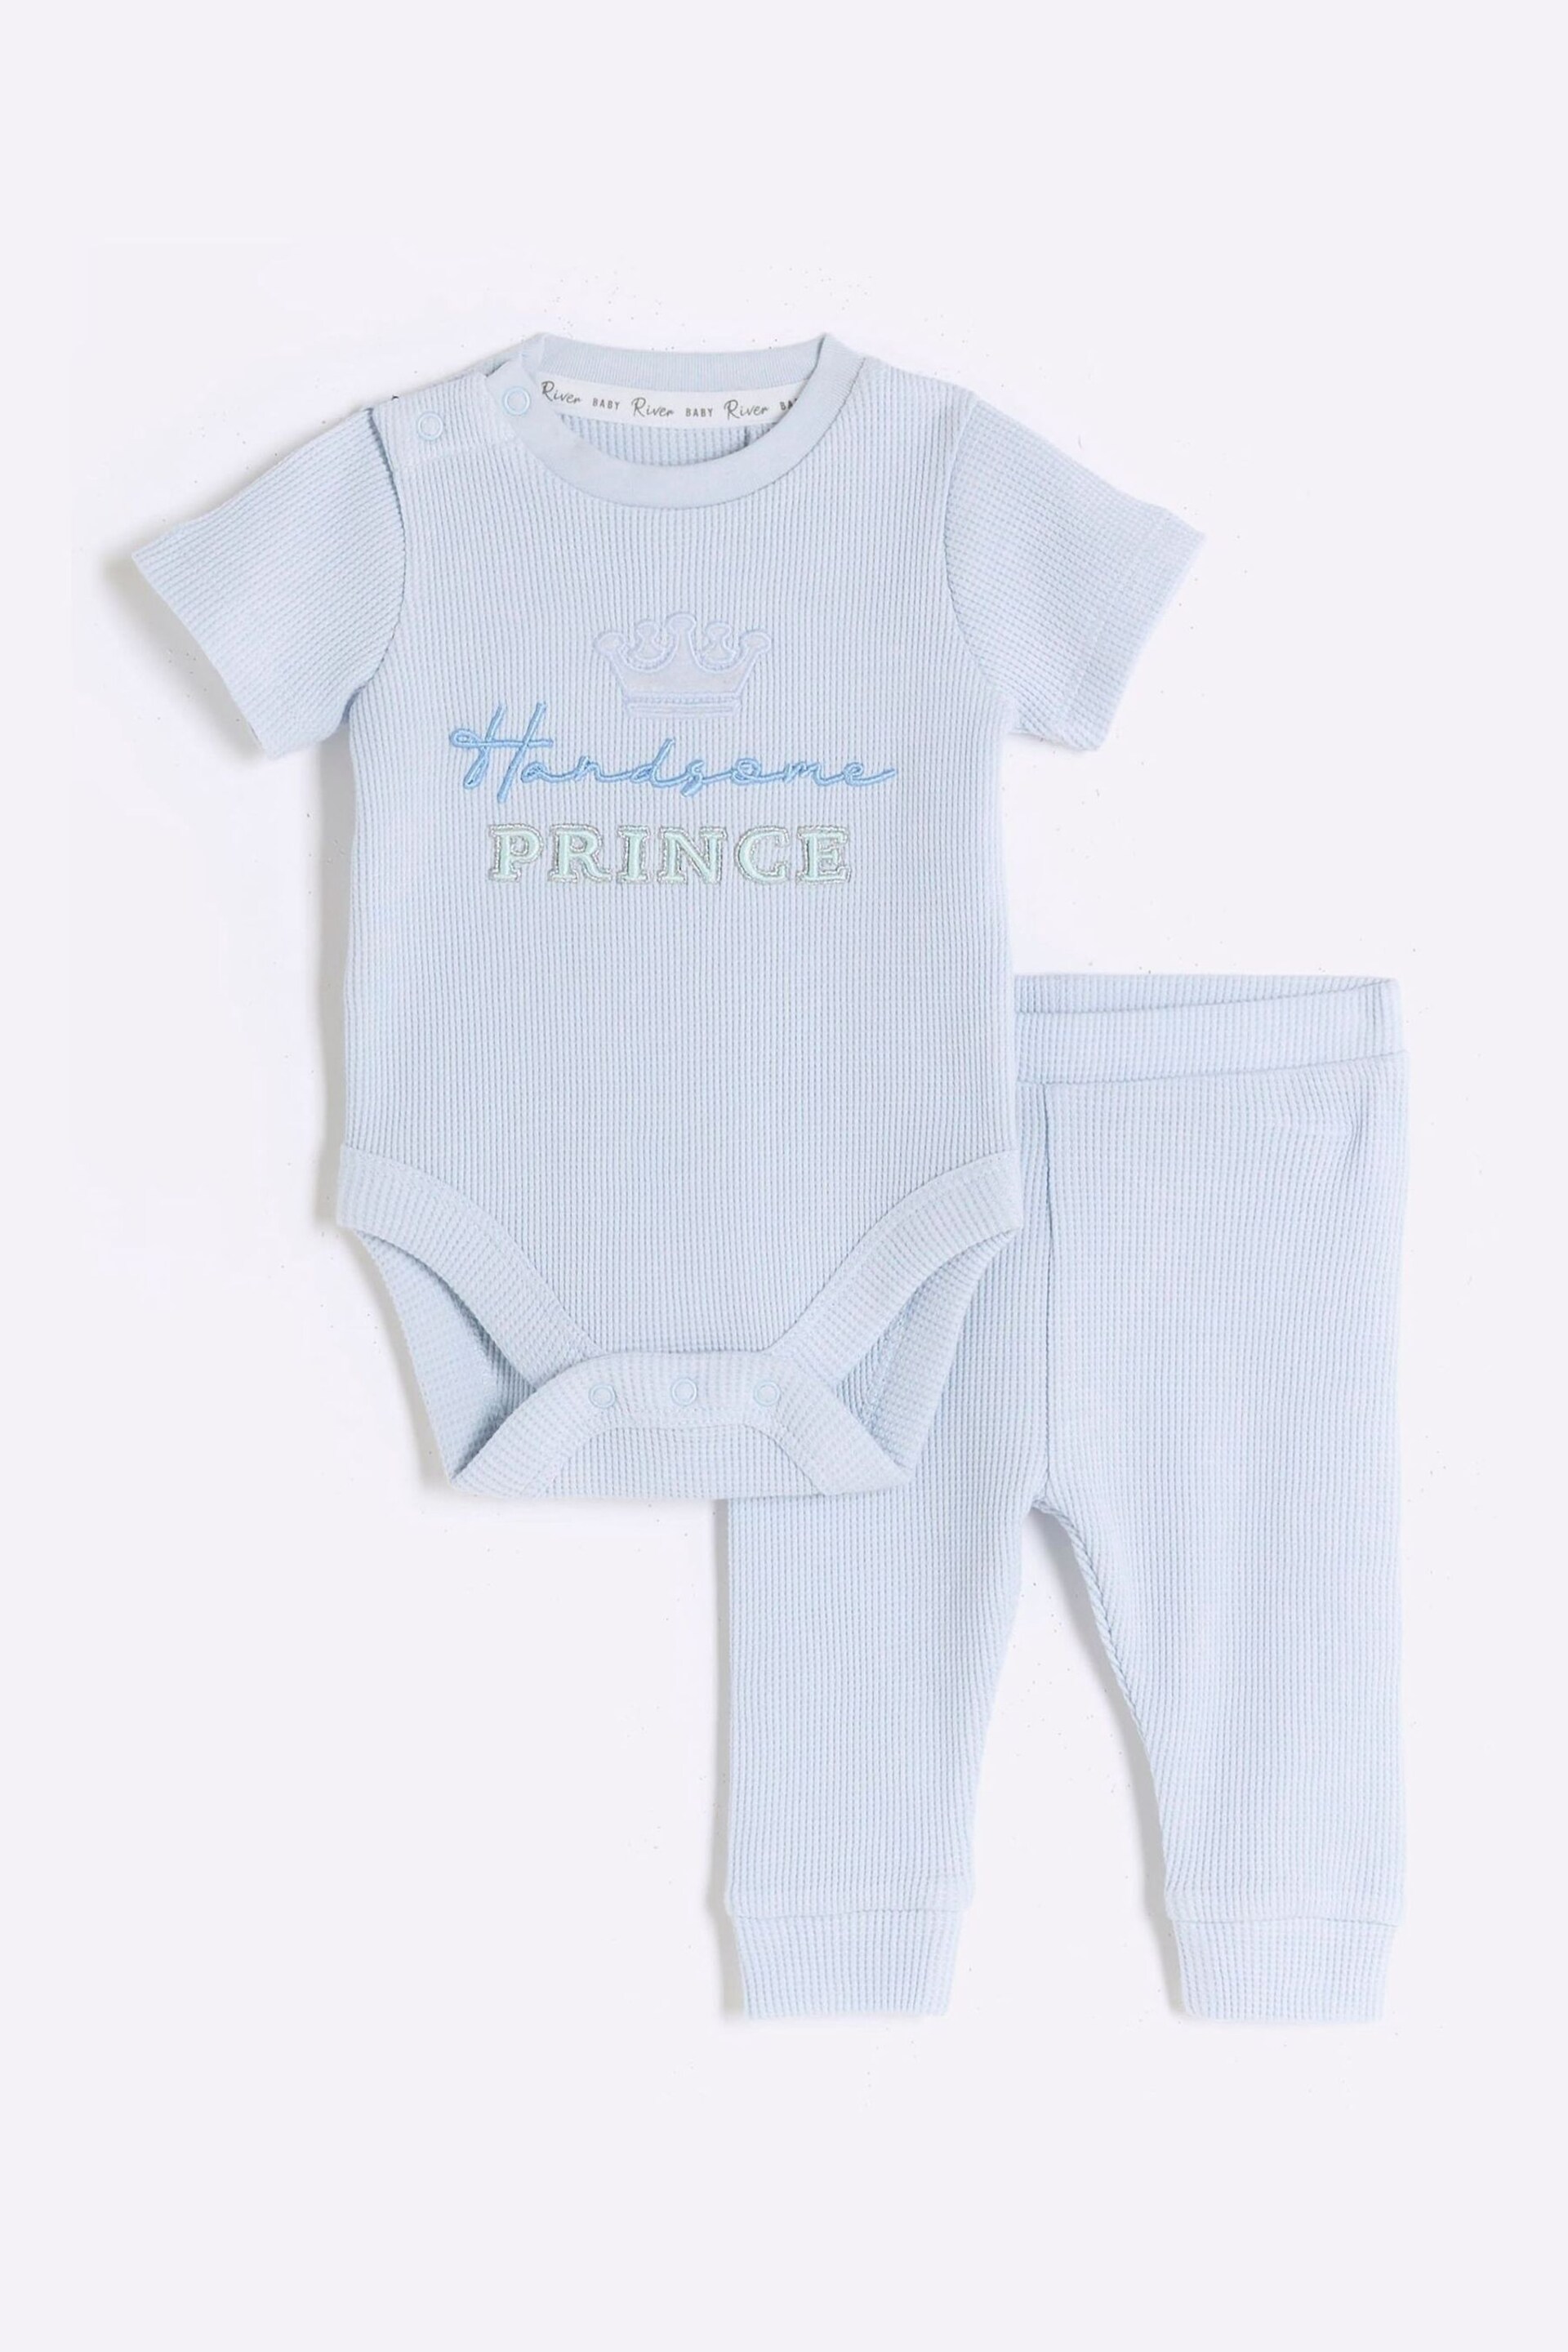 River Island Blue Baby Boys Romper Suit - Image 1 of 3